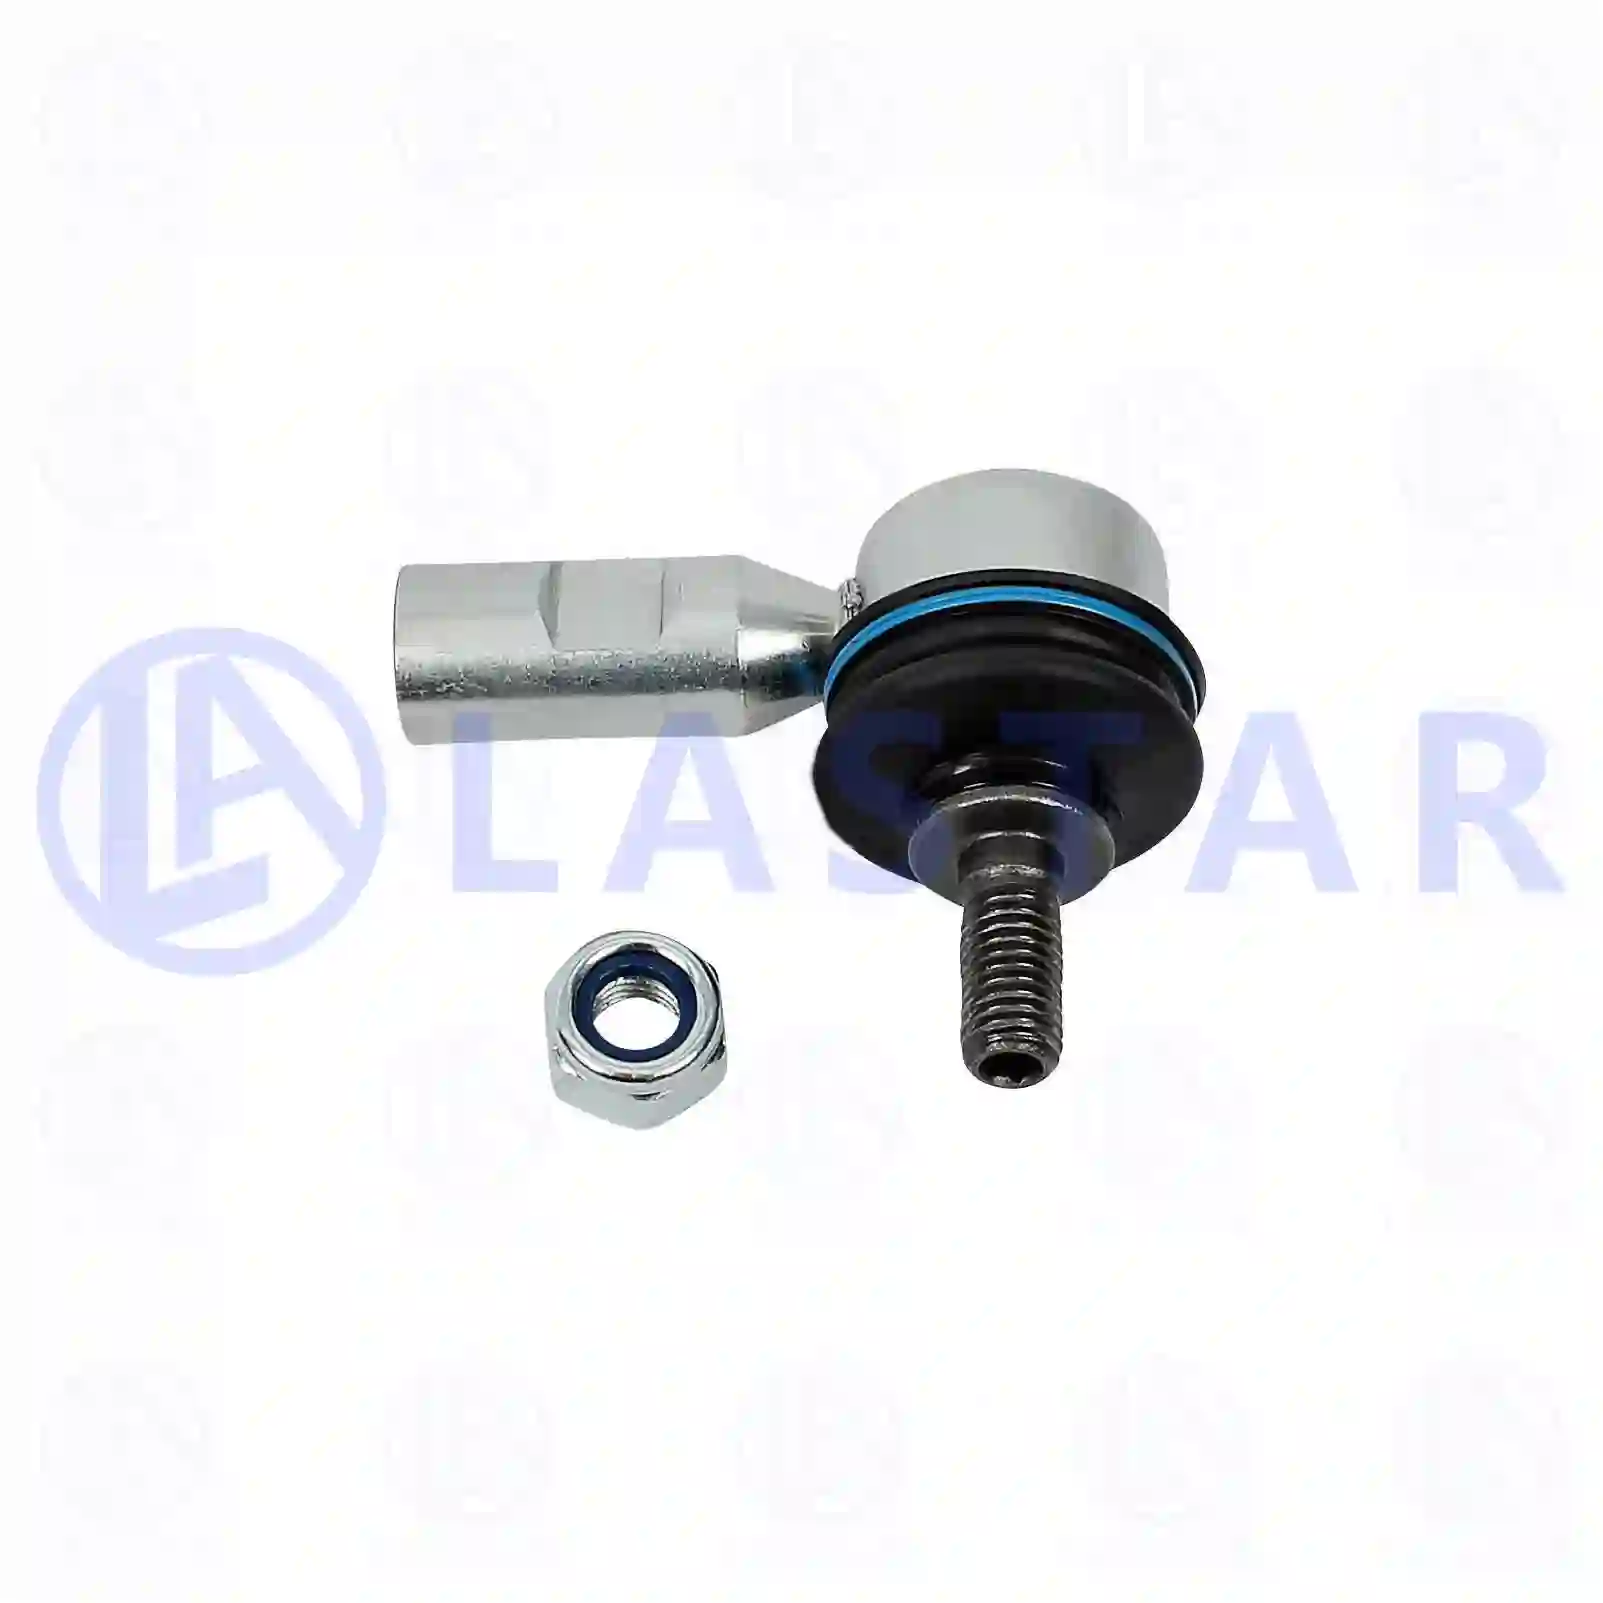 Ball joint, right hand thread, 77731663, 1330985, 0009966645, 0009969345 ||  77731663 Lastar Spare Part | Truck Spare Parts, Auotomotive Spare Parts Ball joint, right hand thread, 77731663, 1330985, 0009966645, 0009969345 ||  77731663 Lastar Spare Part | Truck Spare Parts, Auotomotive Spare Parts